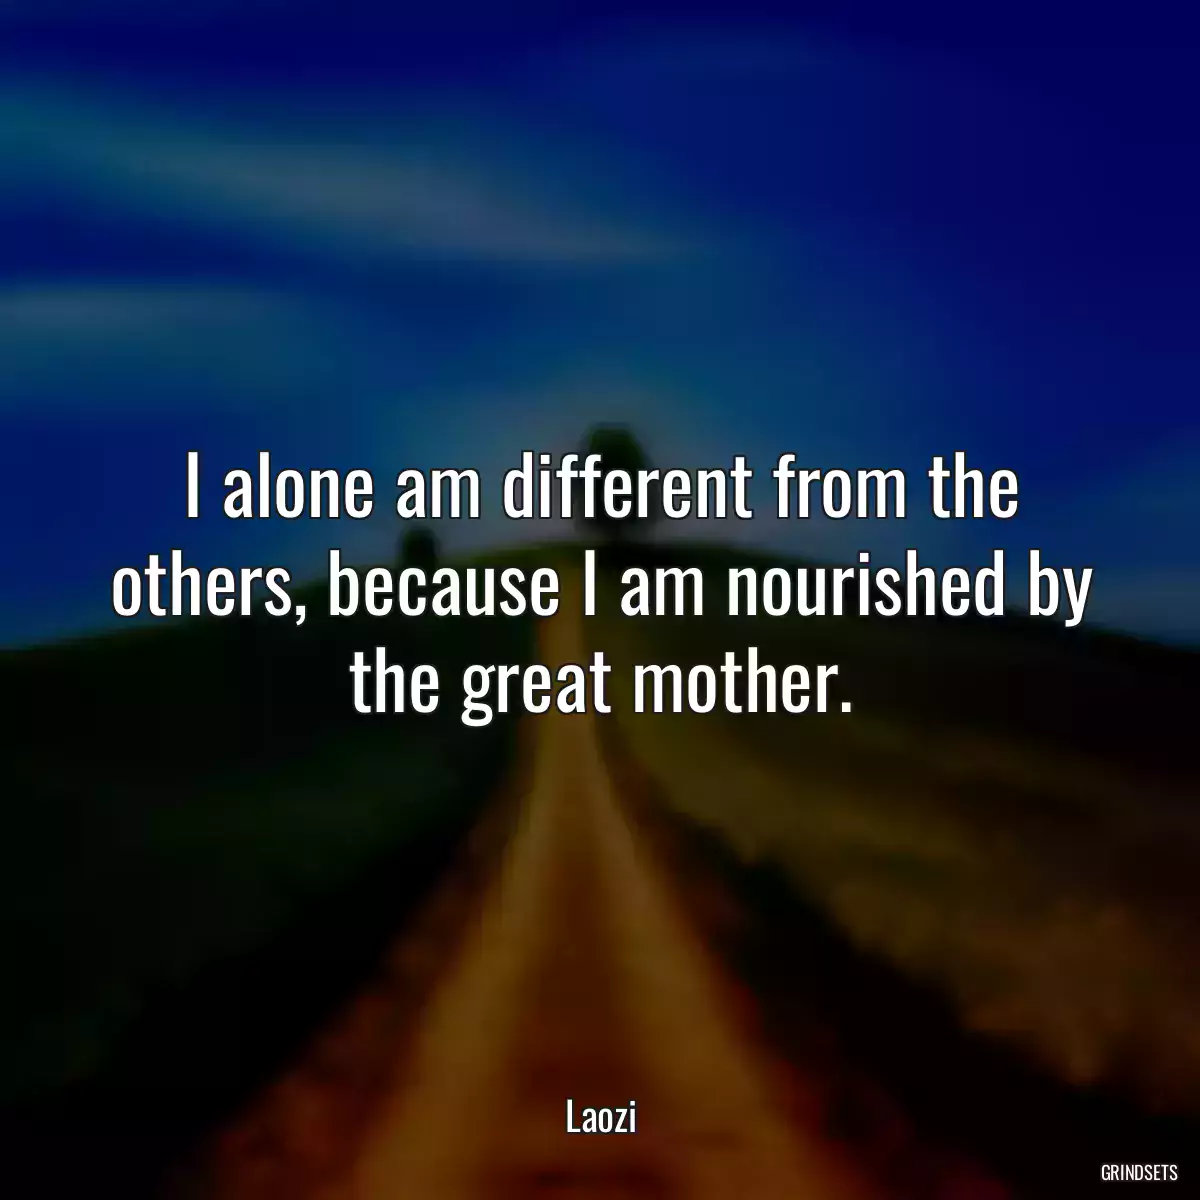 I alone am different from the others, because I am nourished by the great mother.